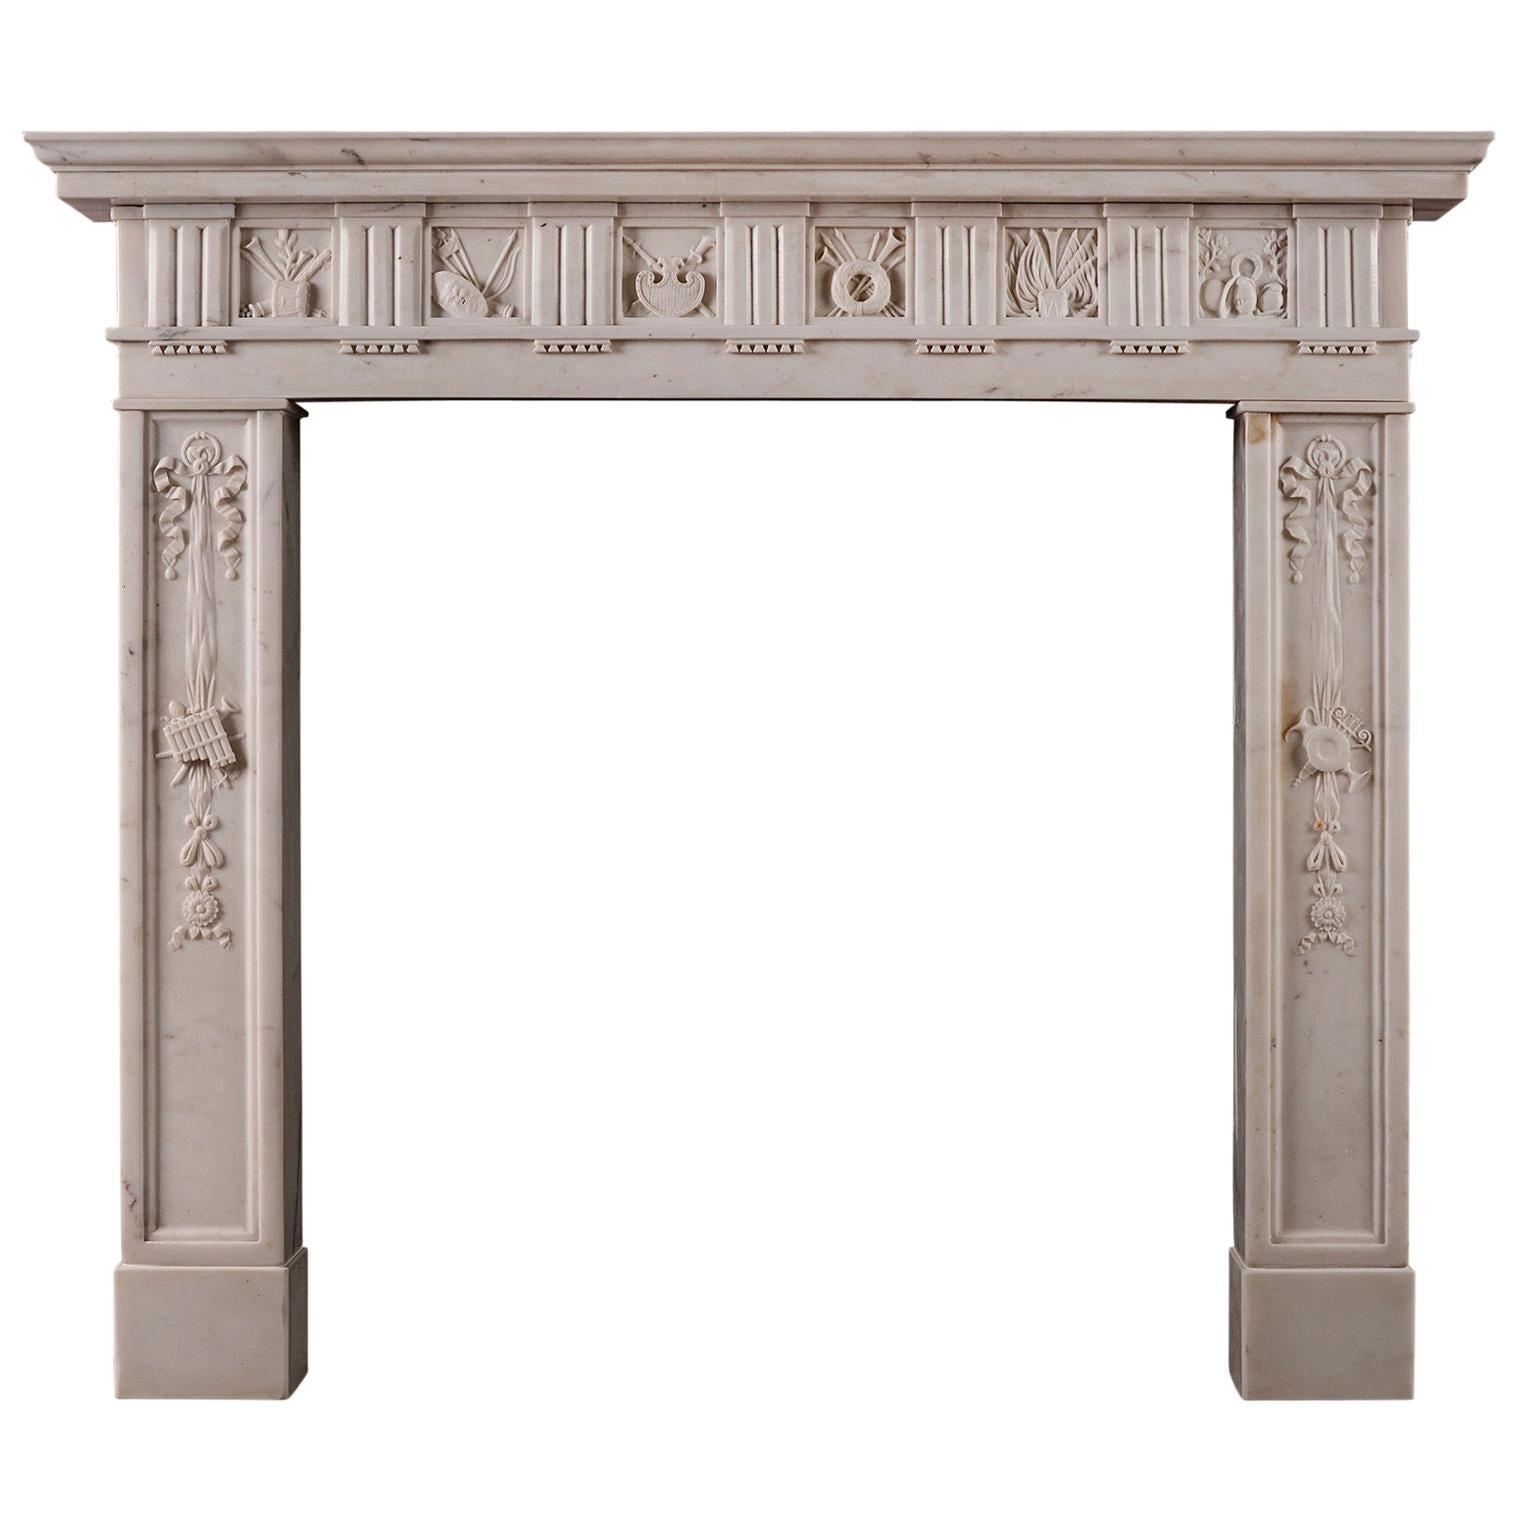 Regency Statuary Marble Fireplace of the Finest Quality